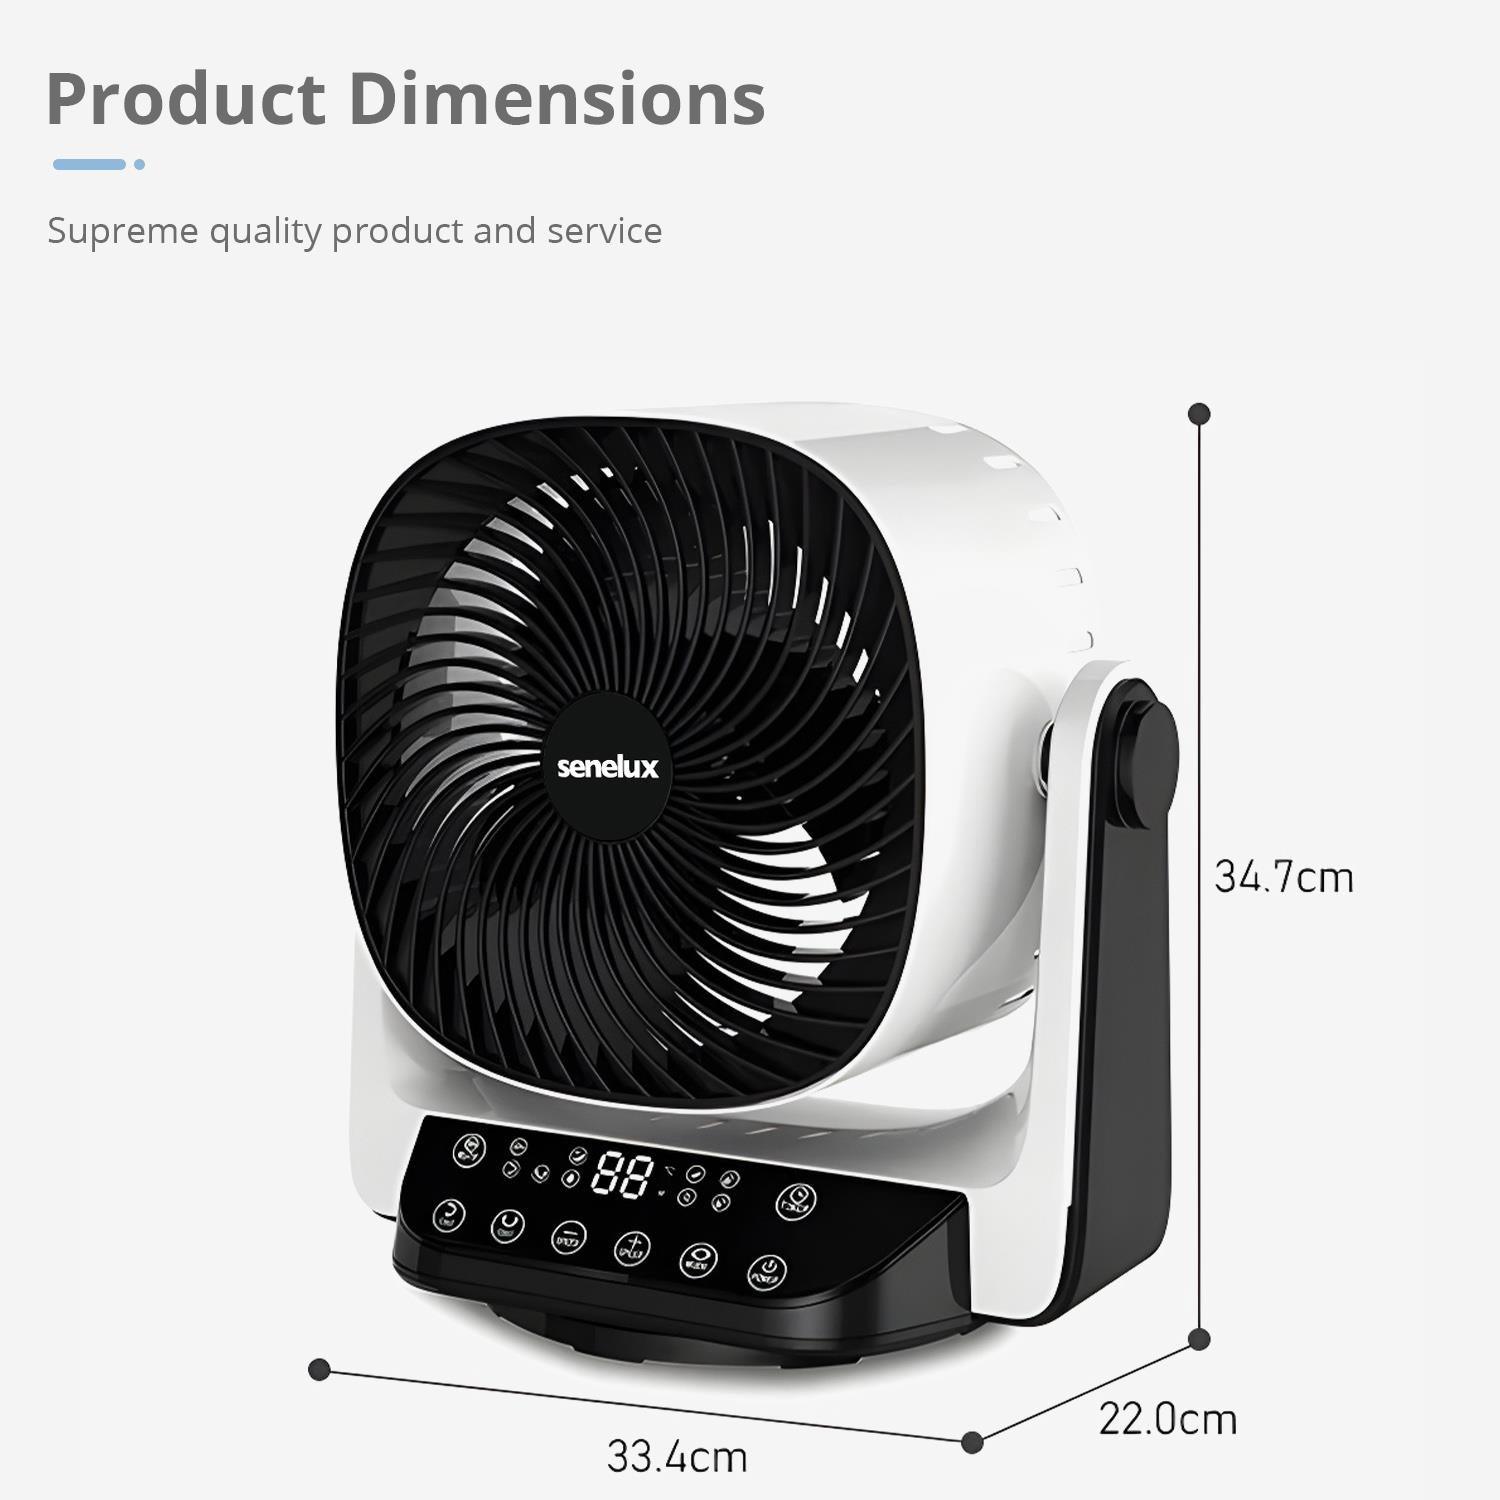 Senelux 9” DC Air Circulator Fan - Ultra Quiet - Automatic Oscillation, 8 Fan Speeds, 4 Operational Modes, Timer, LED Display & Remote Control - Senelux